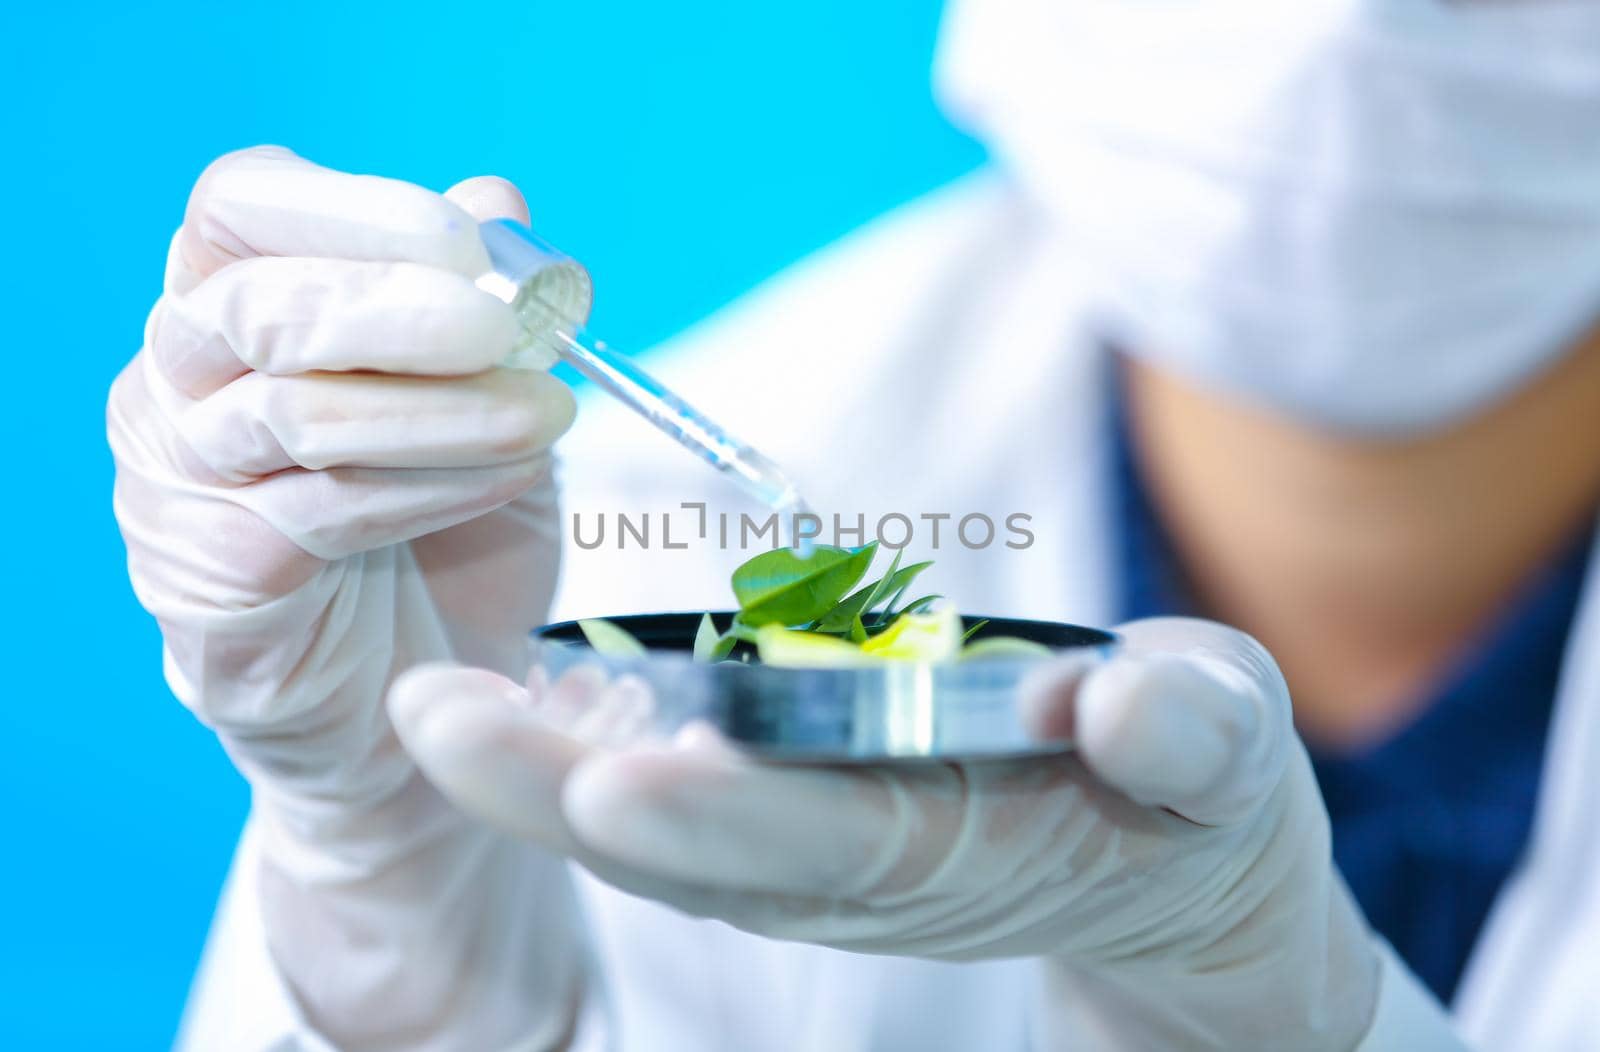 Biochemistry specialist experiment on Natural organic botany and scientific glassware, Alternative herb medicine, Natural skin care beauty products, Research and development concept